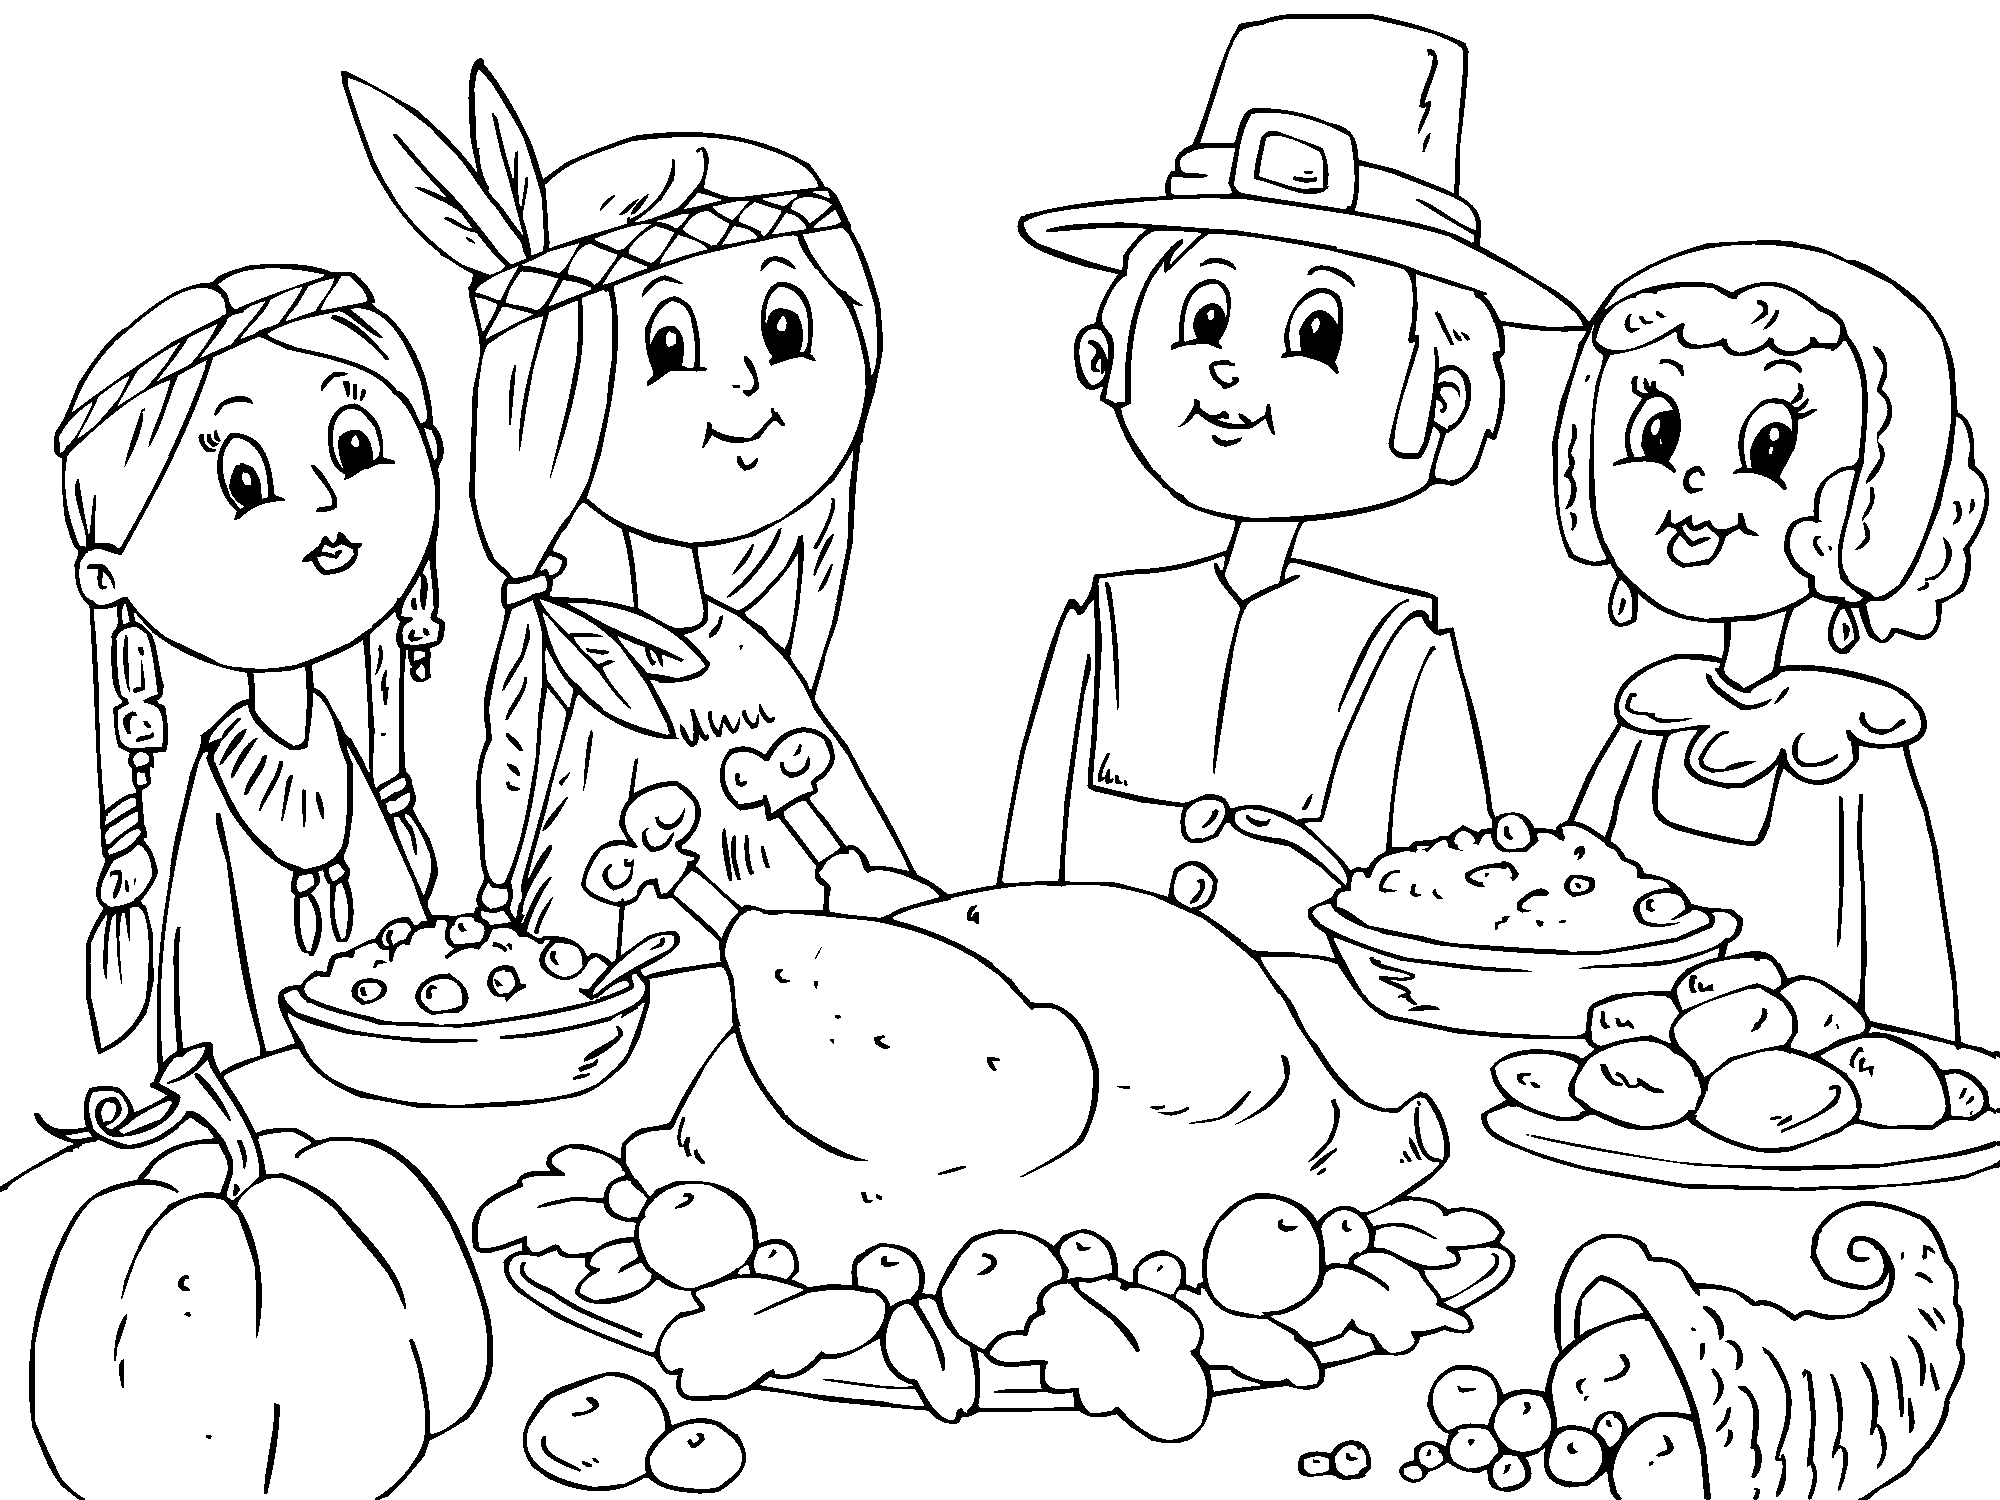 Thanksgiving day coloring pages | Crafts and Worksheets for Preschool